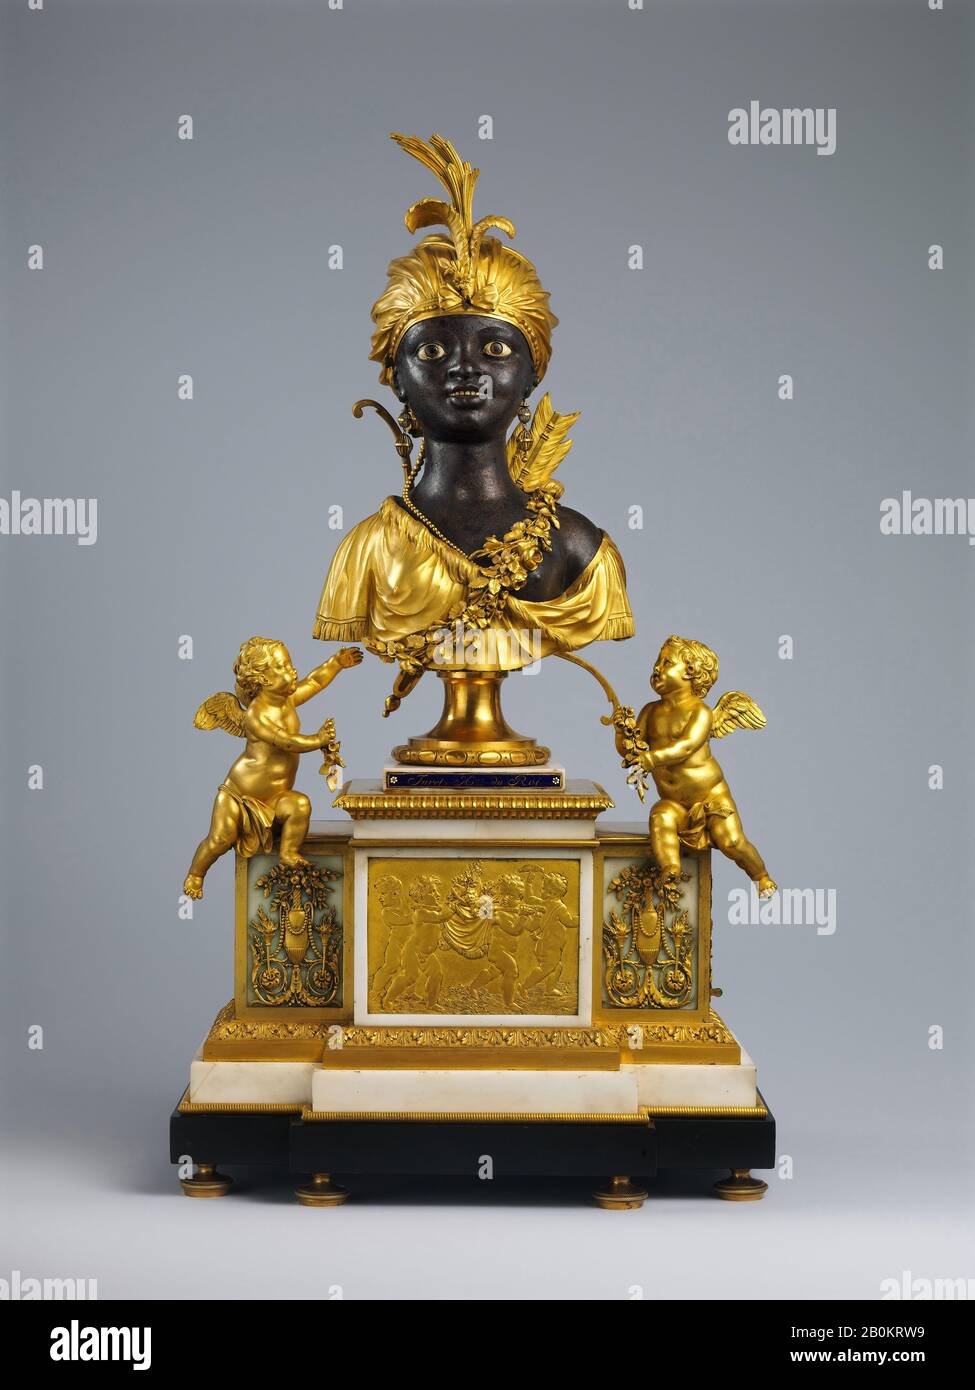 Clockmaker: Jean-Baptiste-André Furet, Mantel clock with musical movement, French, Paris, Clockmaker: Jean-Baptiste-André Furet (French, ca. 1720–1807), ca. 1784, French, Paris, Case: gilded and lacquered bronze and marble; Movement (in bust): brass and steel with enameled hour and minute chapter rings; Miniature organ with pipes and bellows (in base): brass, steel, and leather, Overall: 29 × 16 1/4 × 9 in. (73.7 × 41.3 × 22.9 cm), Horology Stock Photo